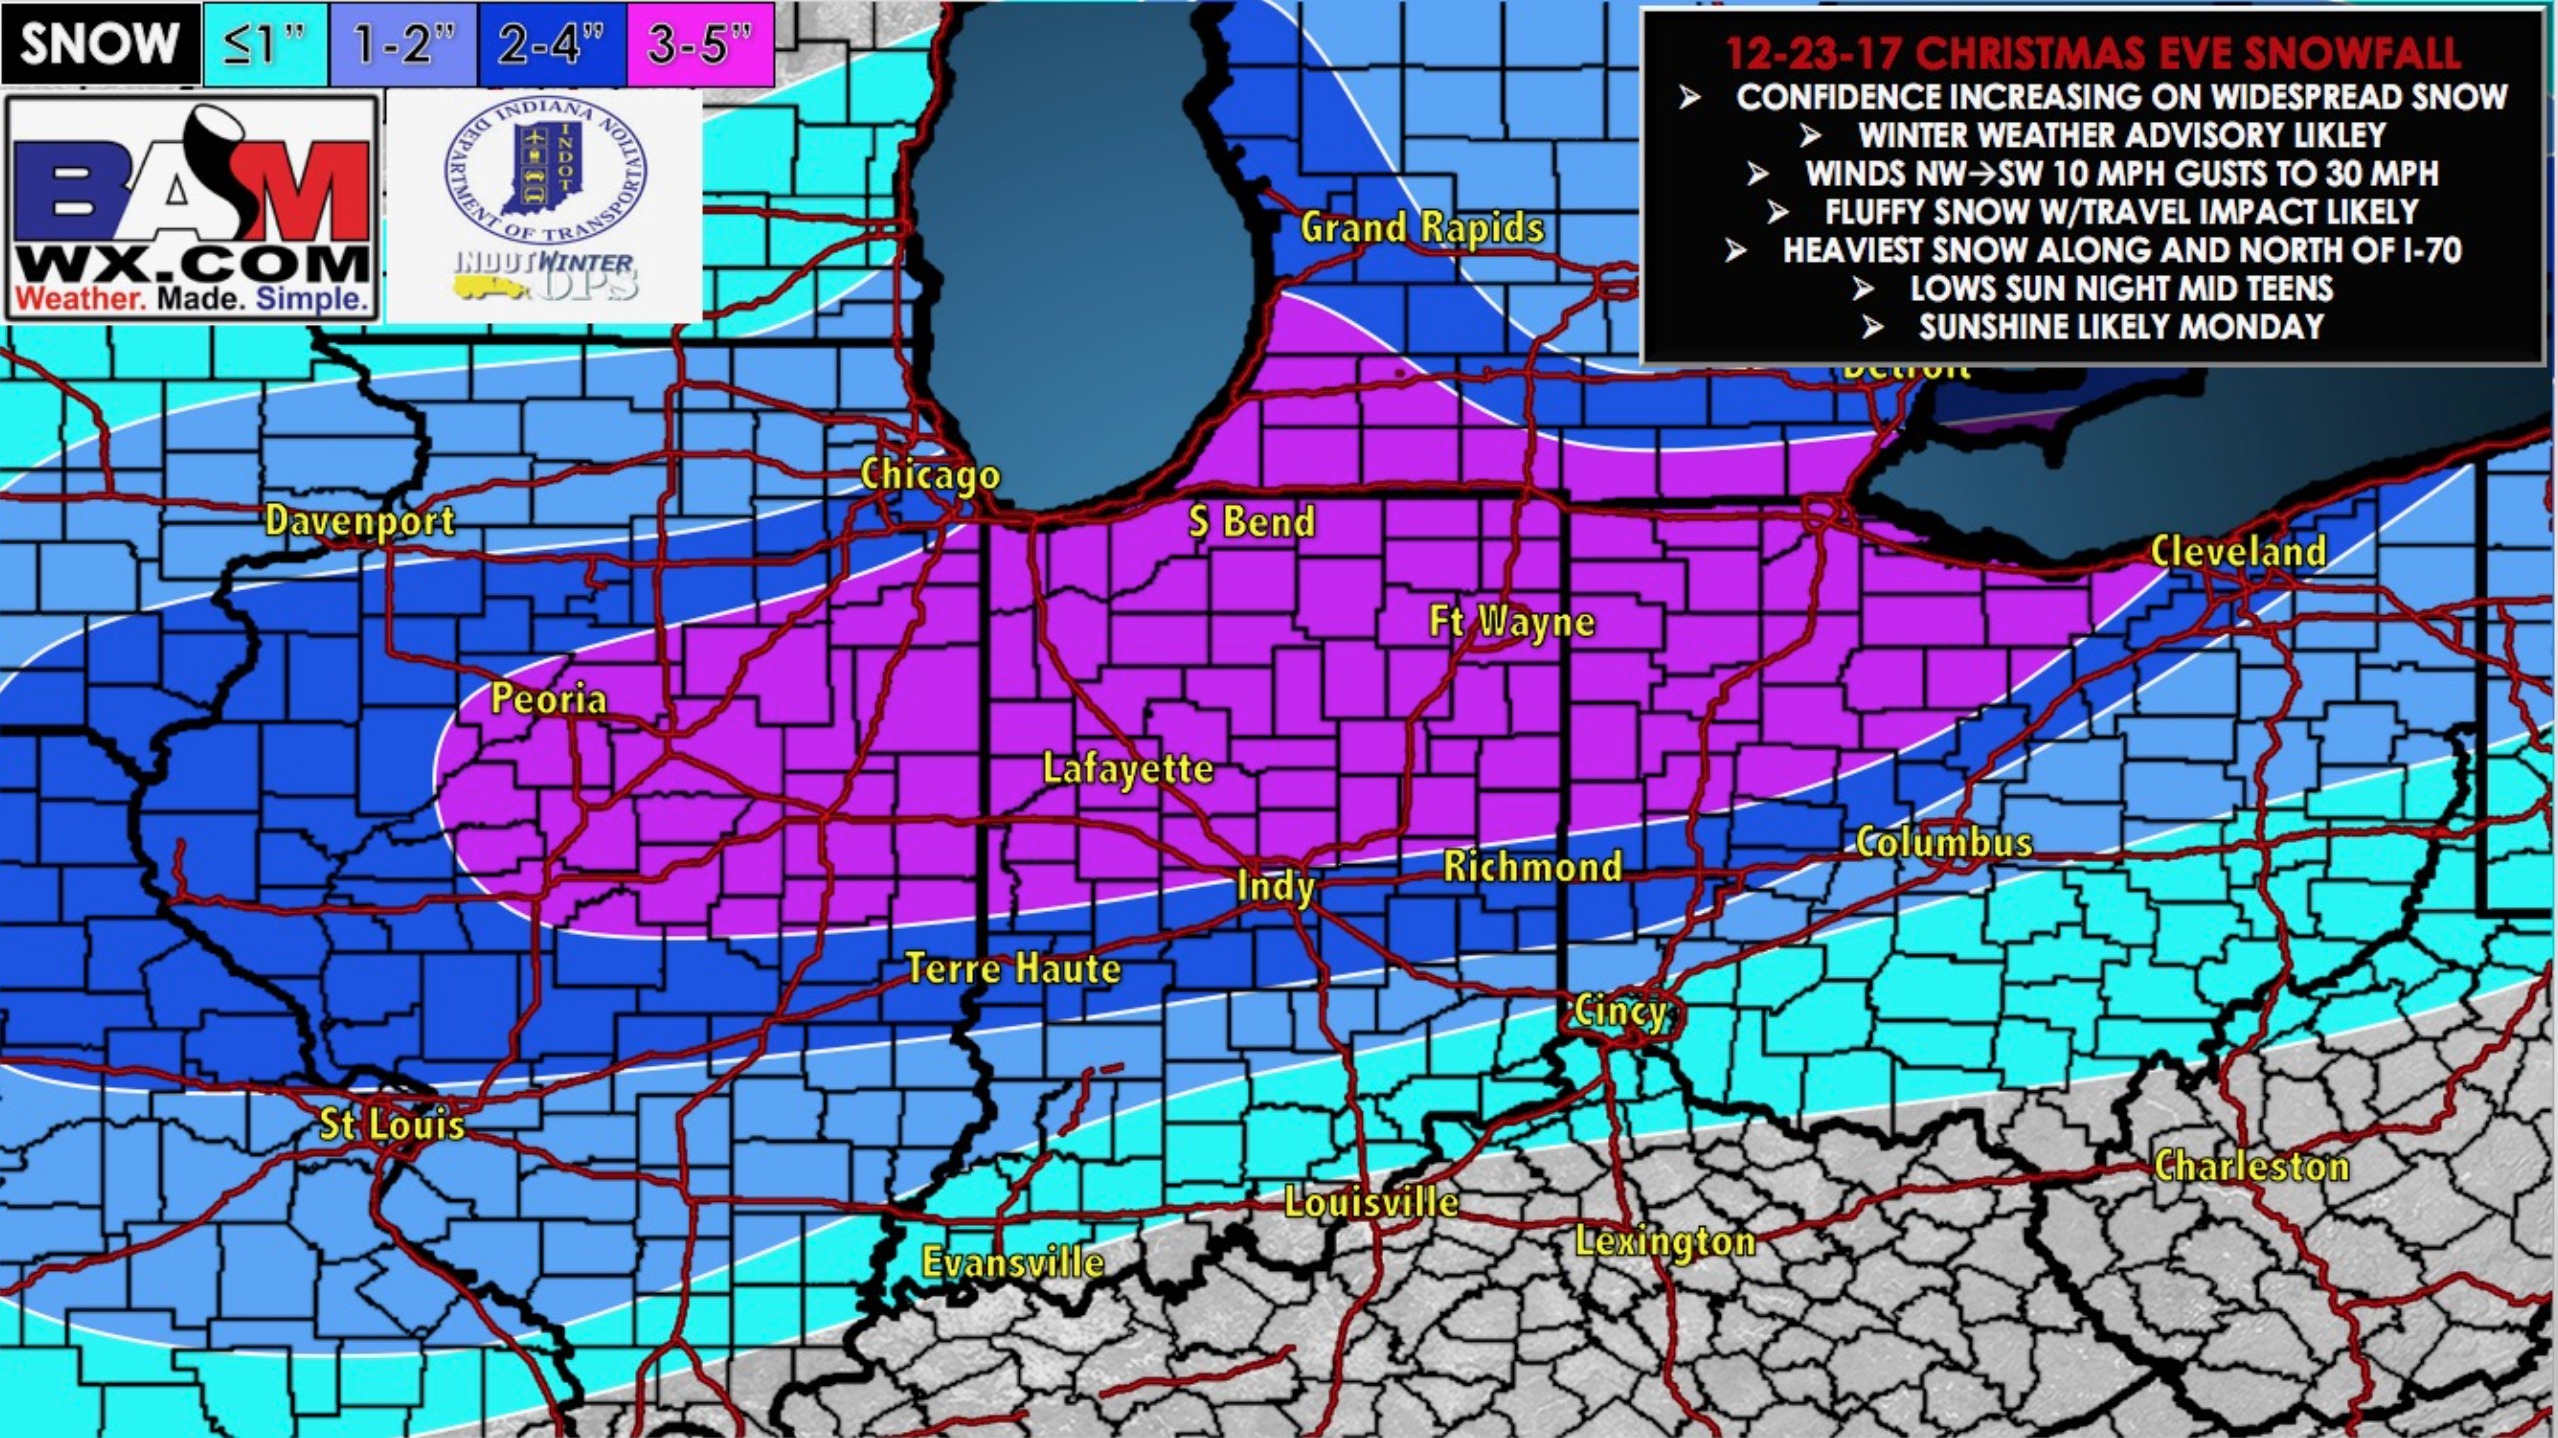 12-23-17 Northern INDOT Districts Update on Accumulating Snow Christmas Eve. K.